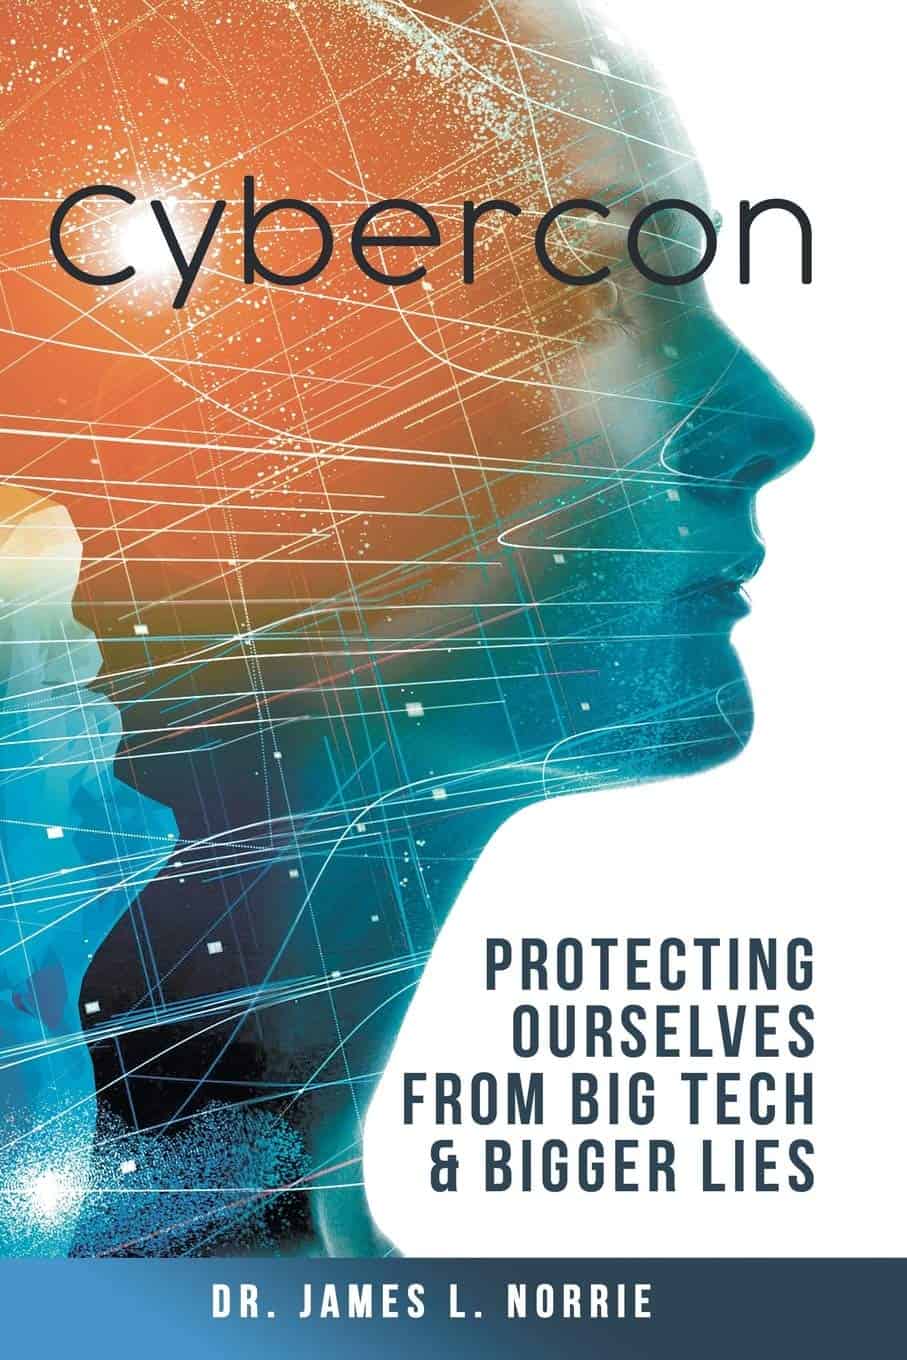 Cybercon Protecting Ourselves from Big Tech Bigger Lies | Mindstir Media Book Cover